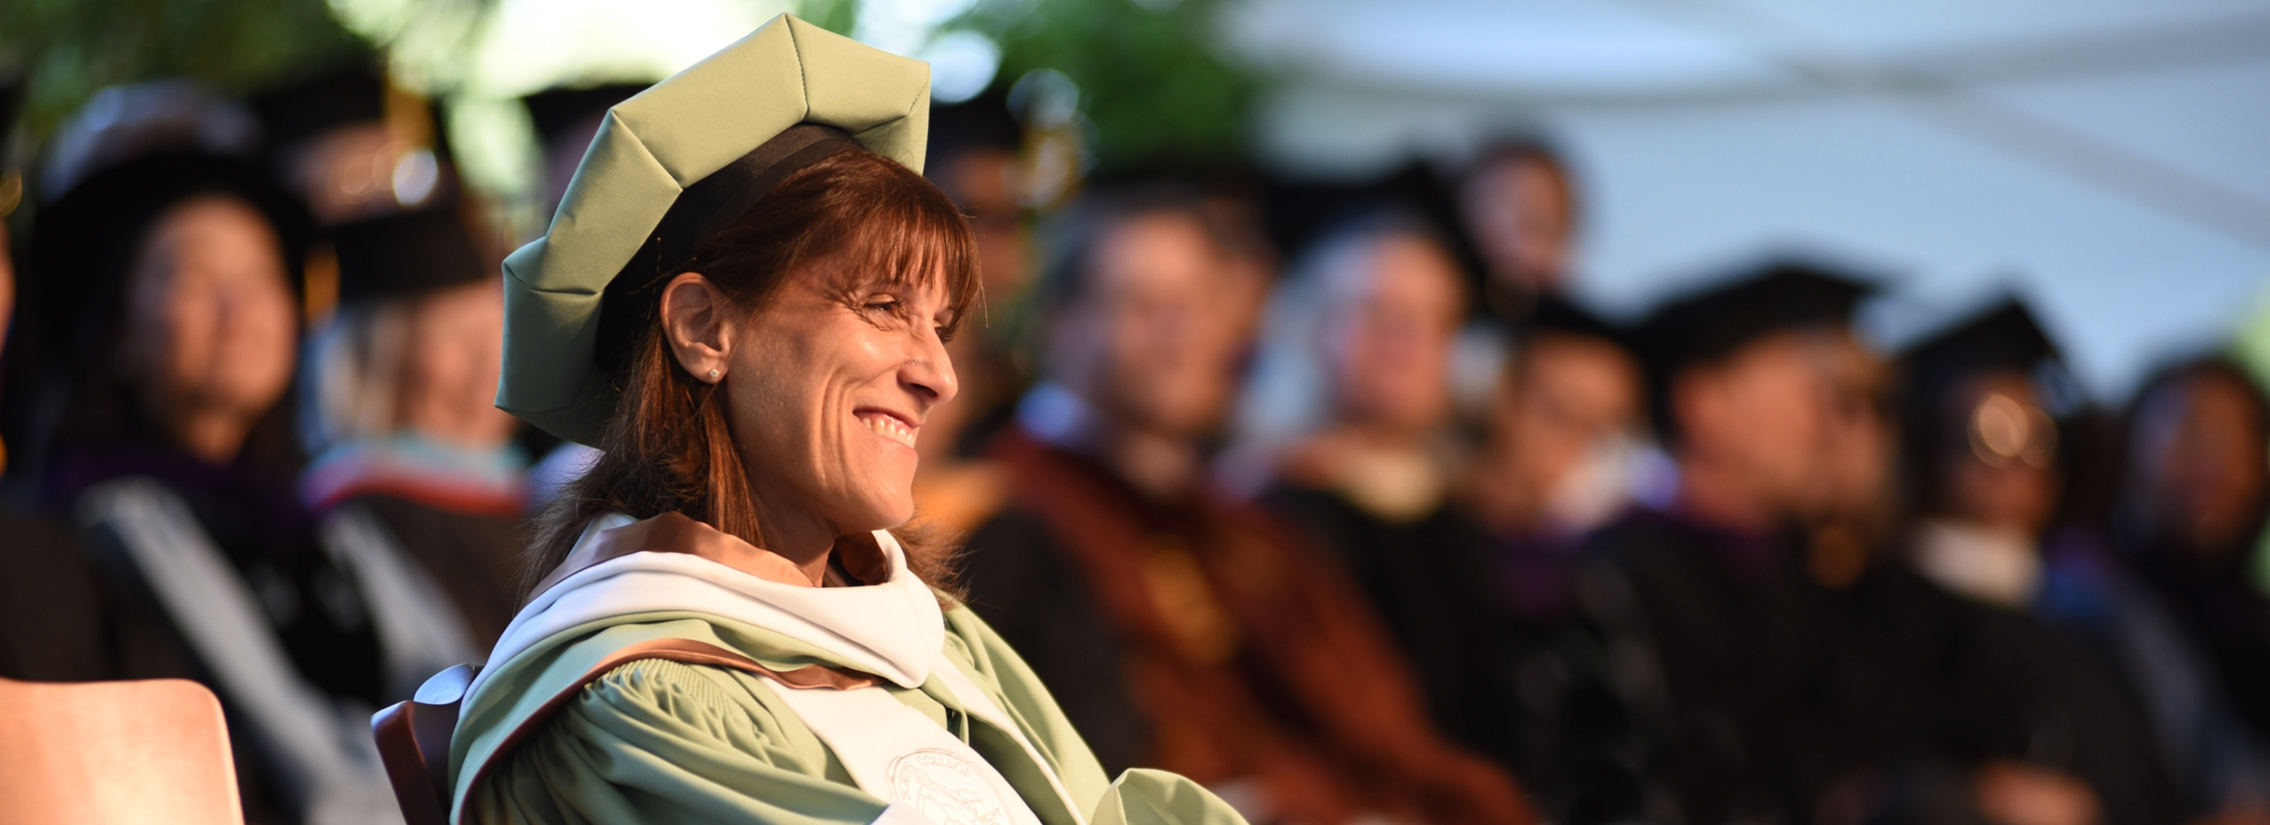 Image of Amy Marcus Newhall at commencement ceremony